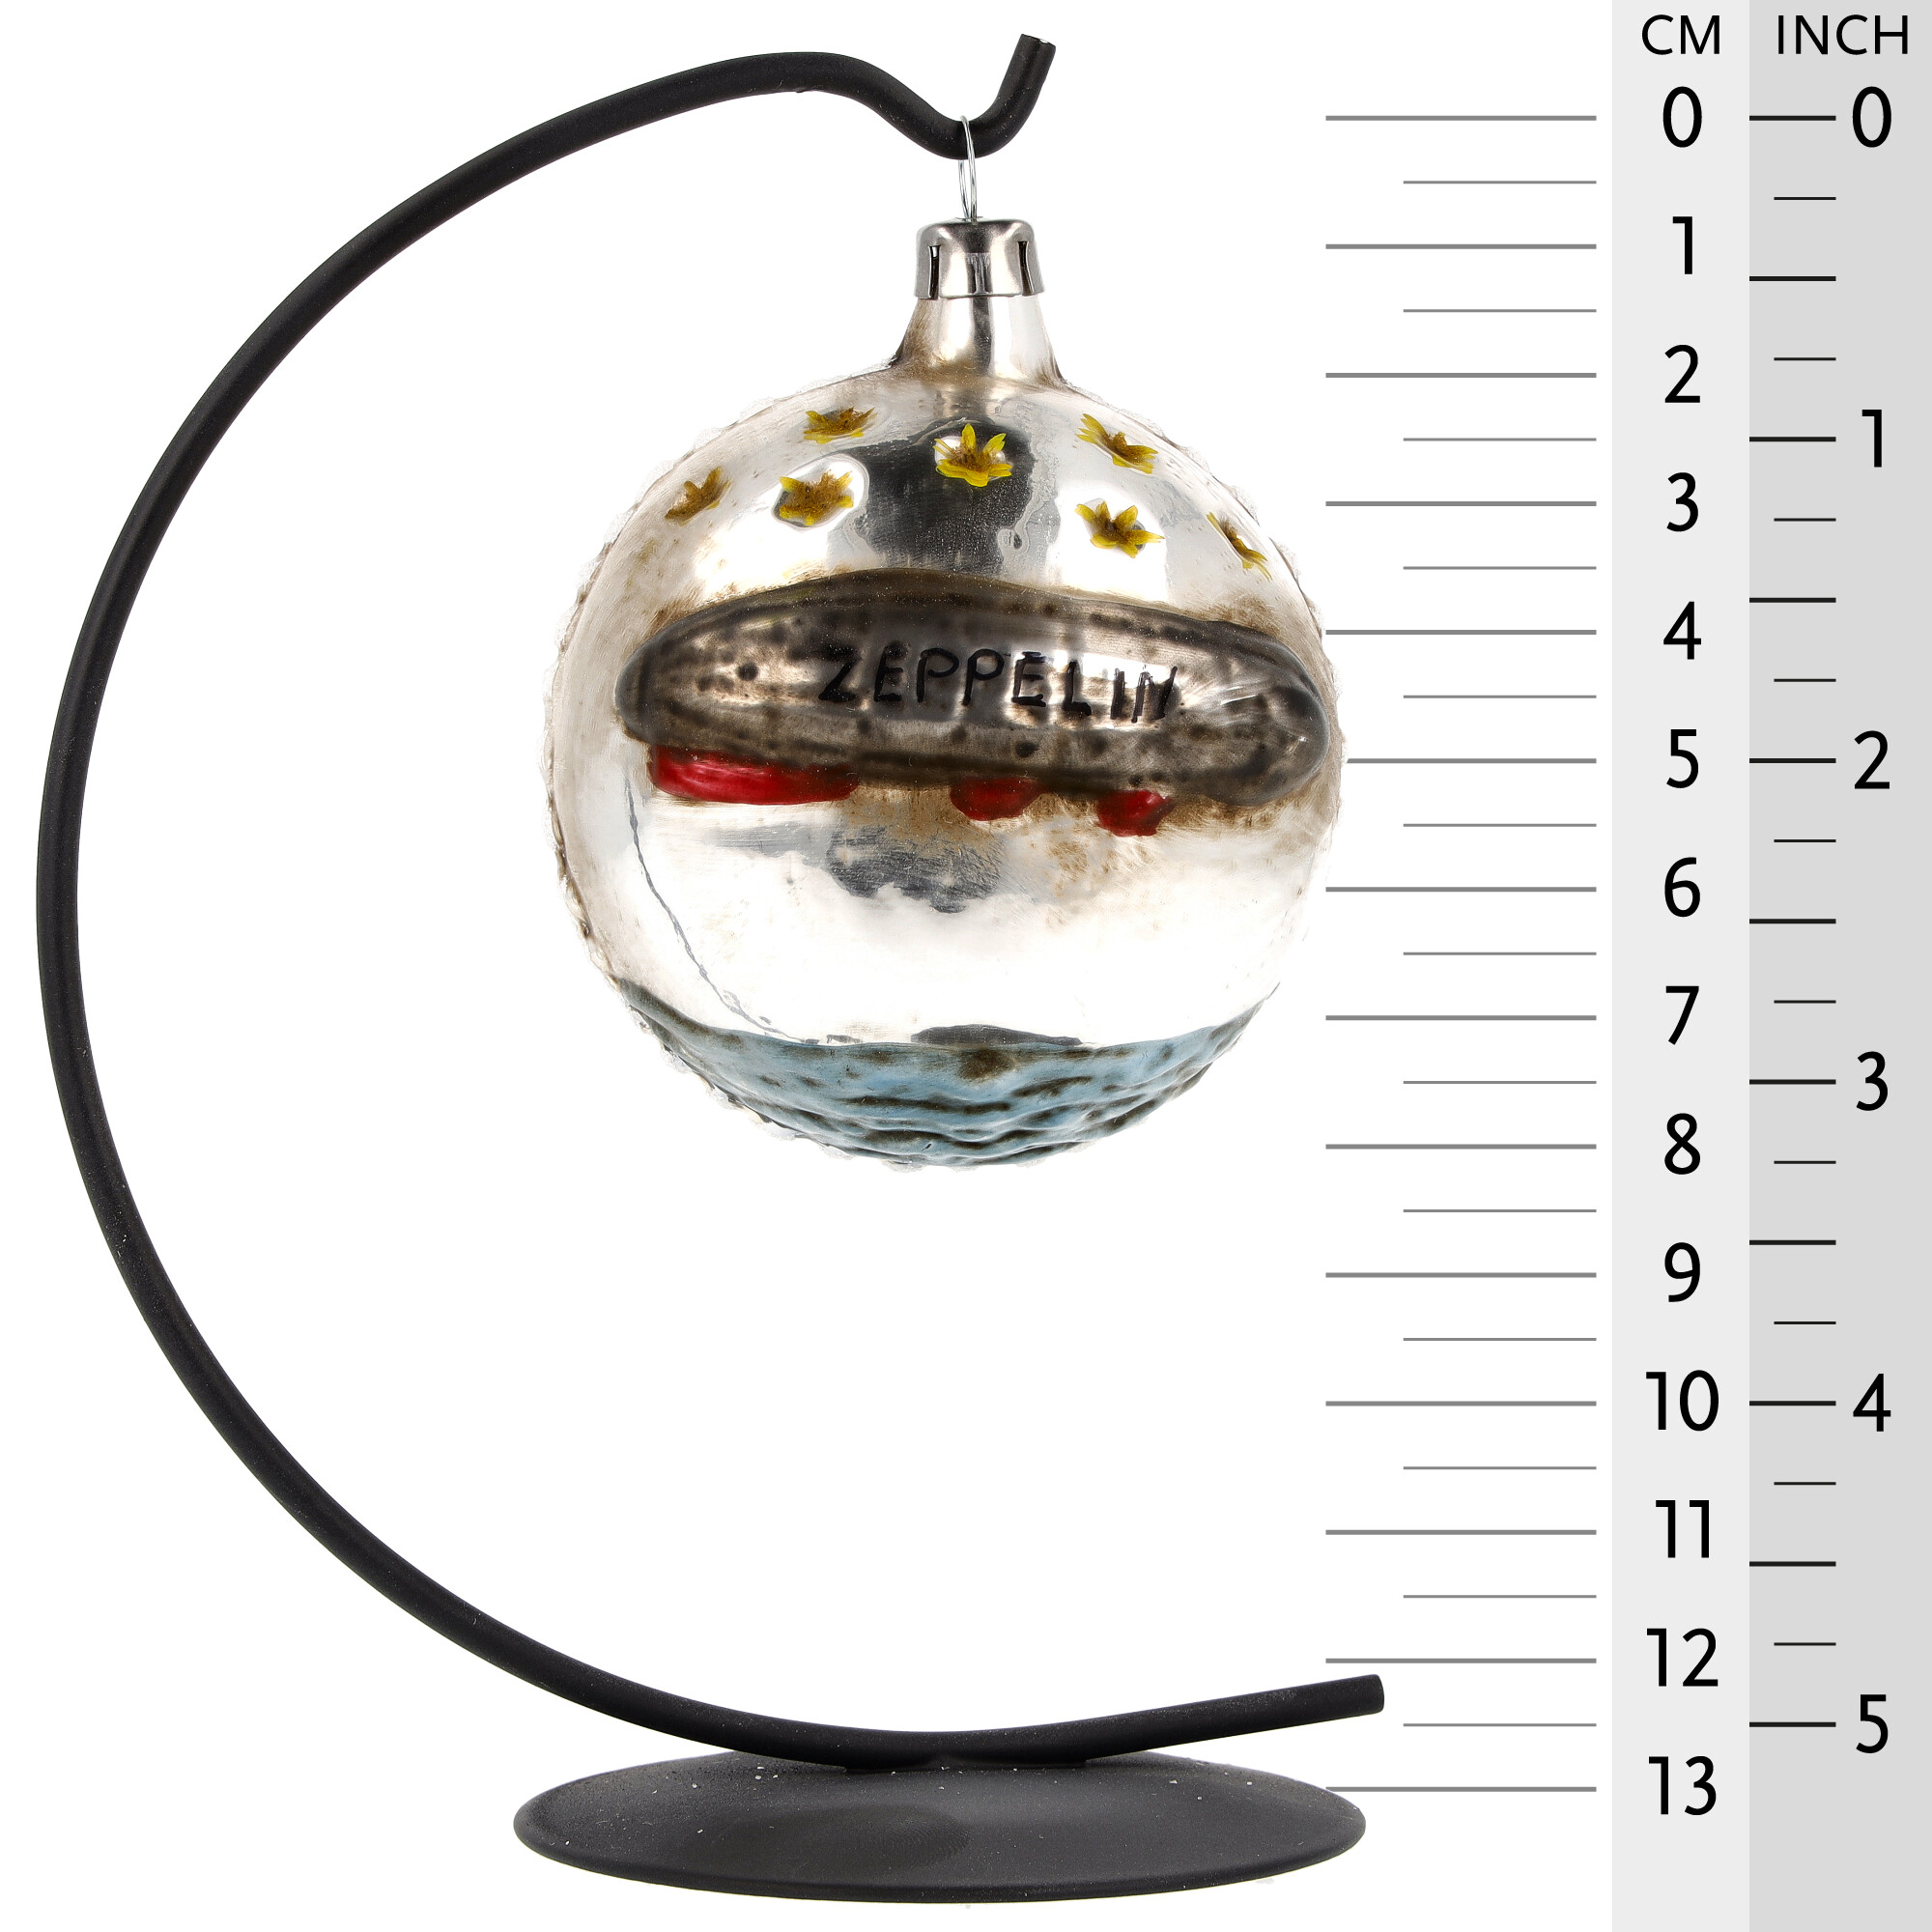 Retro Vintage style Christmas Glass Ornament - Ball with Zeppelin airship